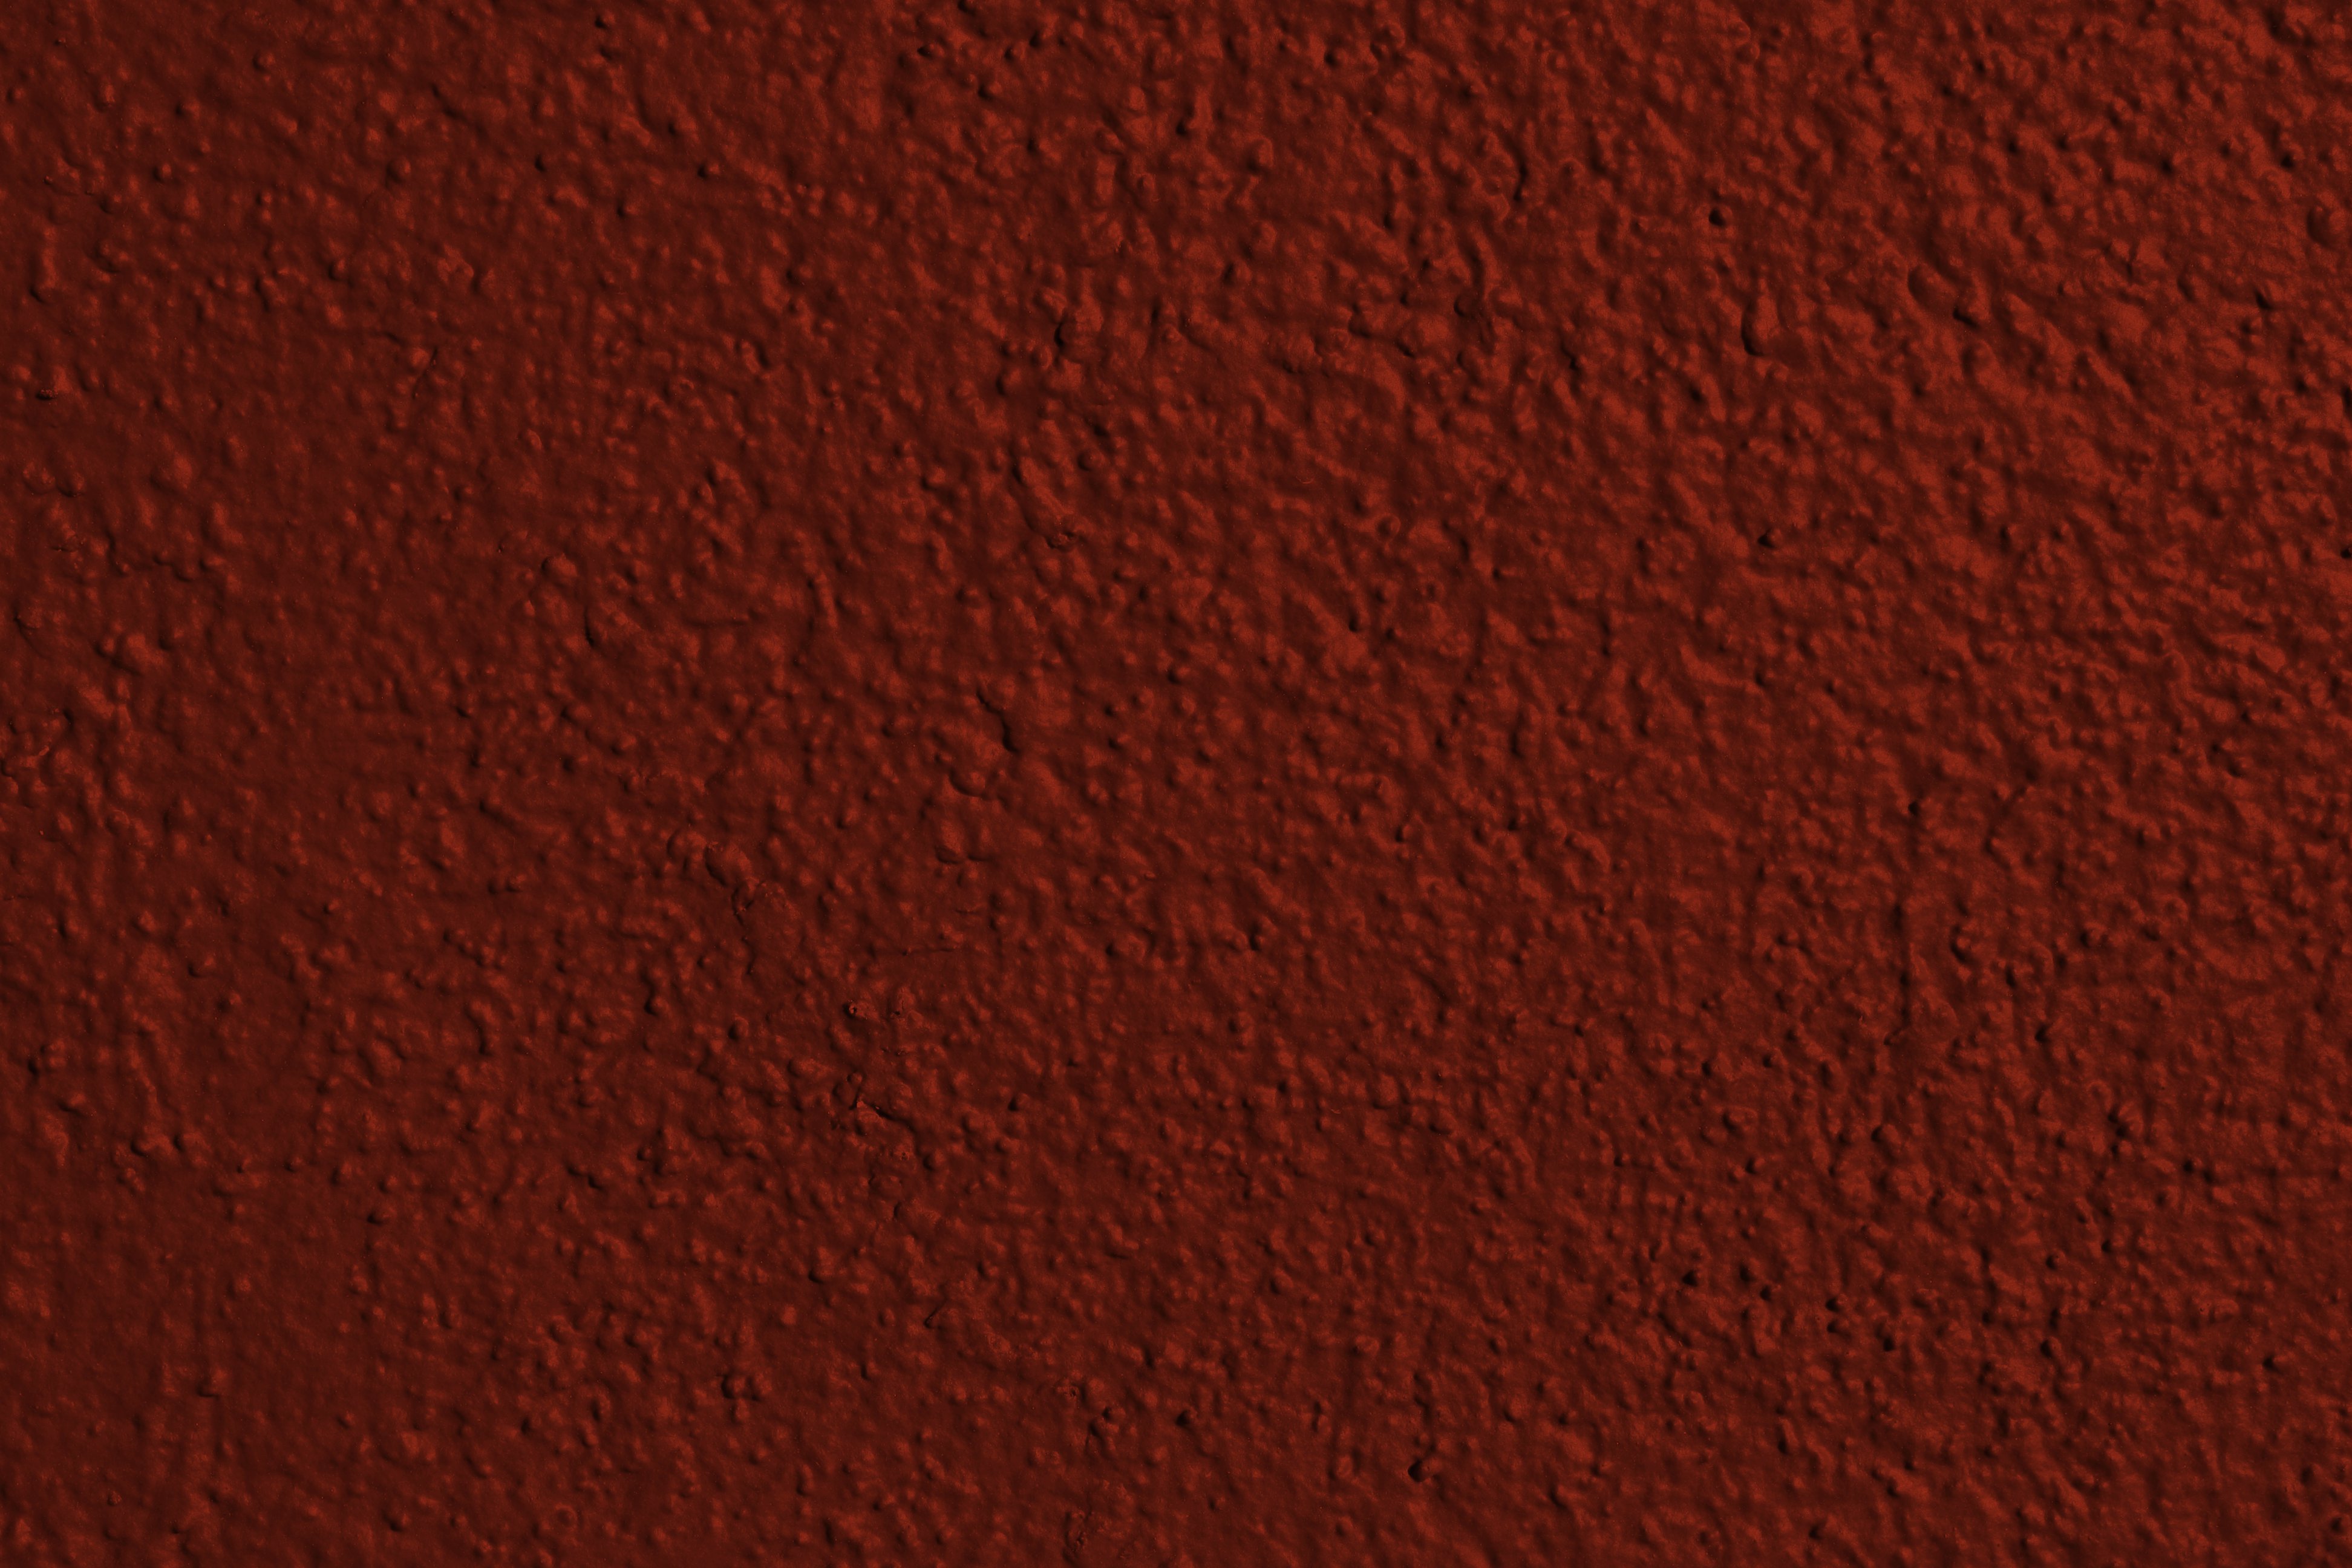 Dark Brick Red Colored Painted Wall Texture Picture Photograph